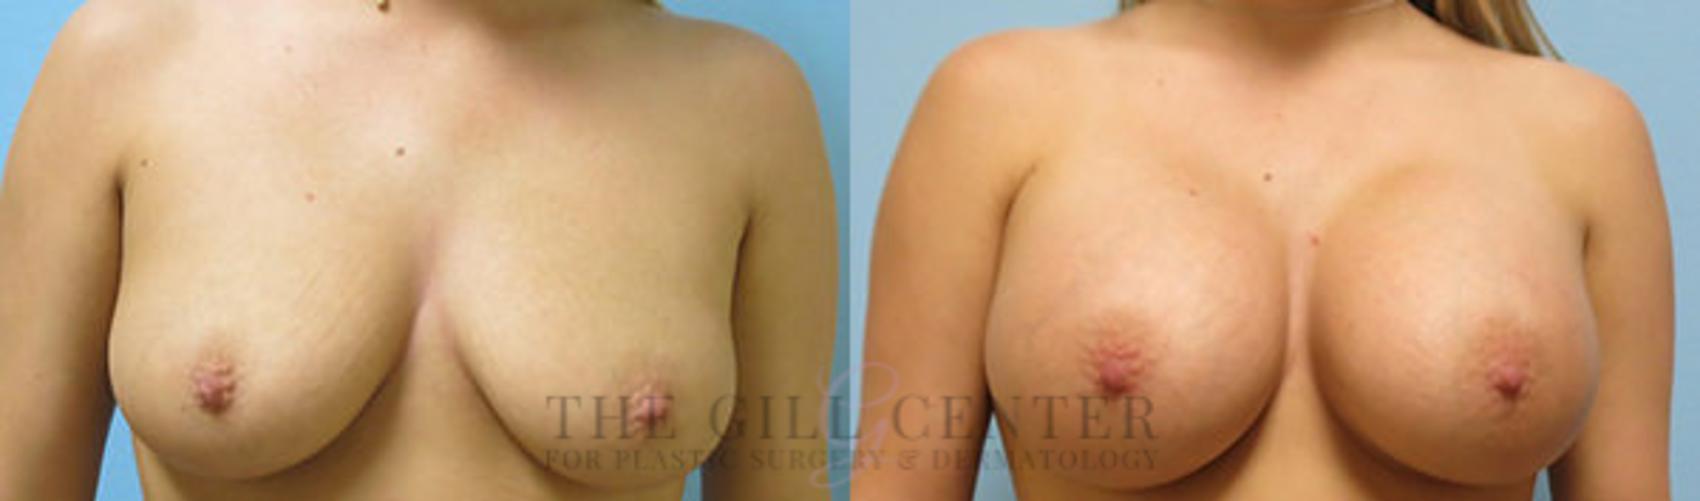 Breast Augmentation Case 43 Before & After Front | The Woodlands, TX | The Gill Center for Plastic Surgery and Dermatology